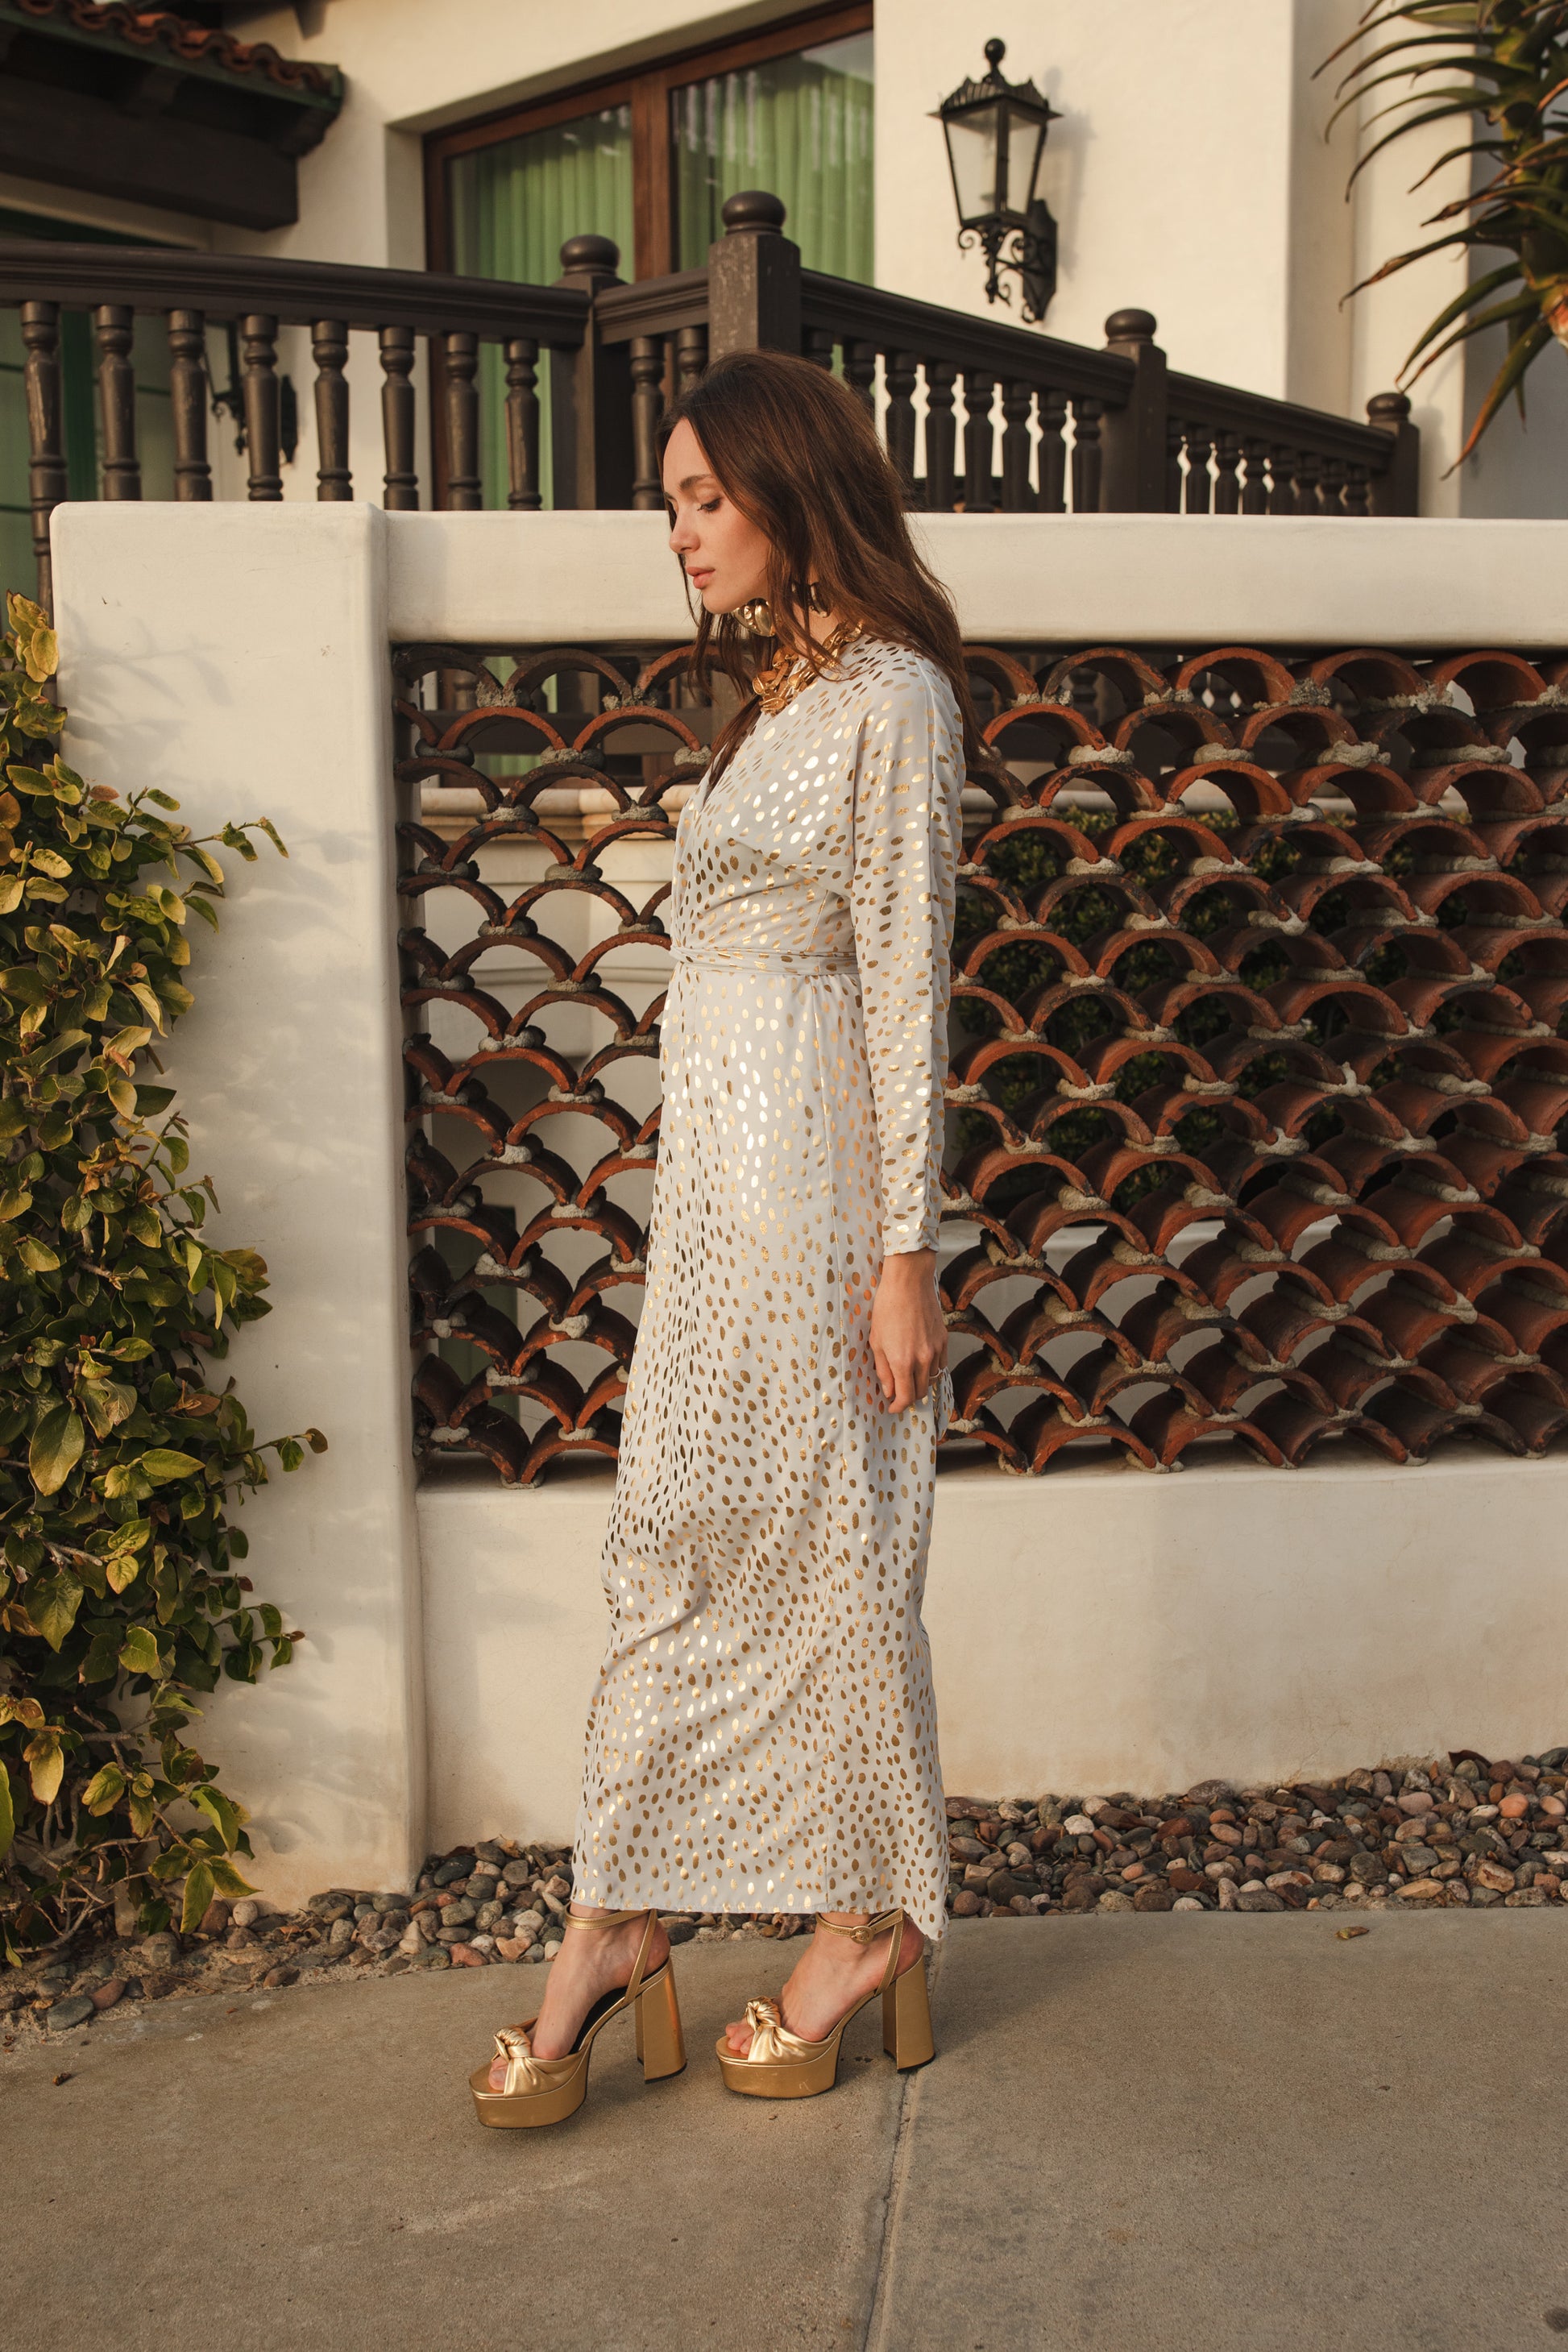 jennafer grace ivory white gold foil polkadot polka dot old hollywood glam boho bohemian batwing cocktail party evening dress gown handmade